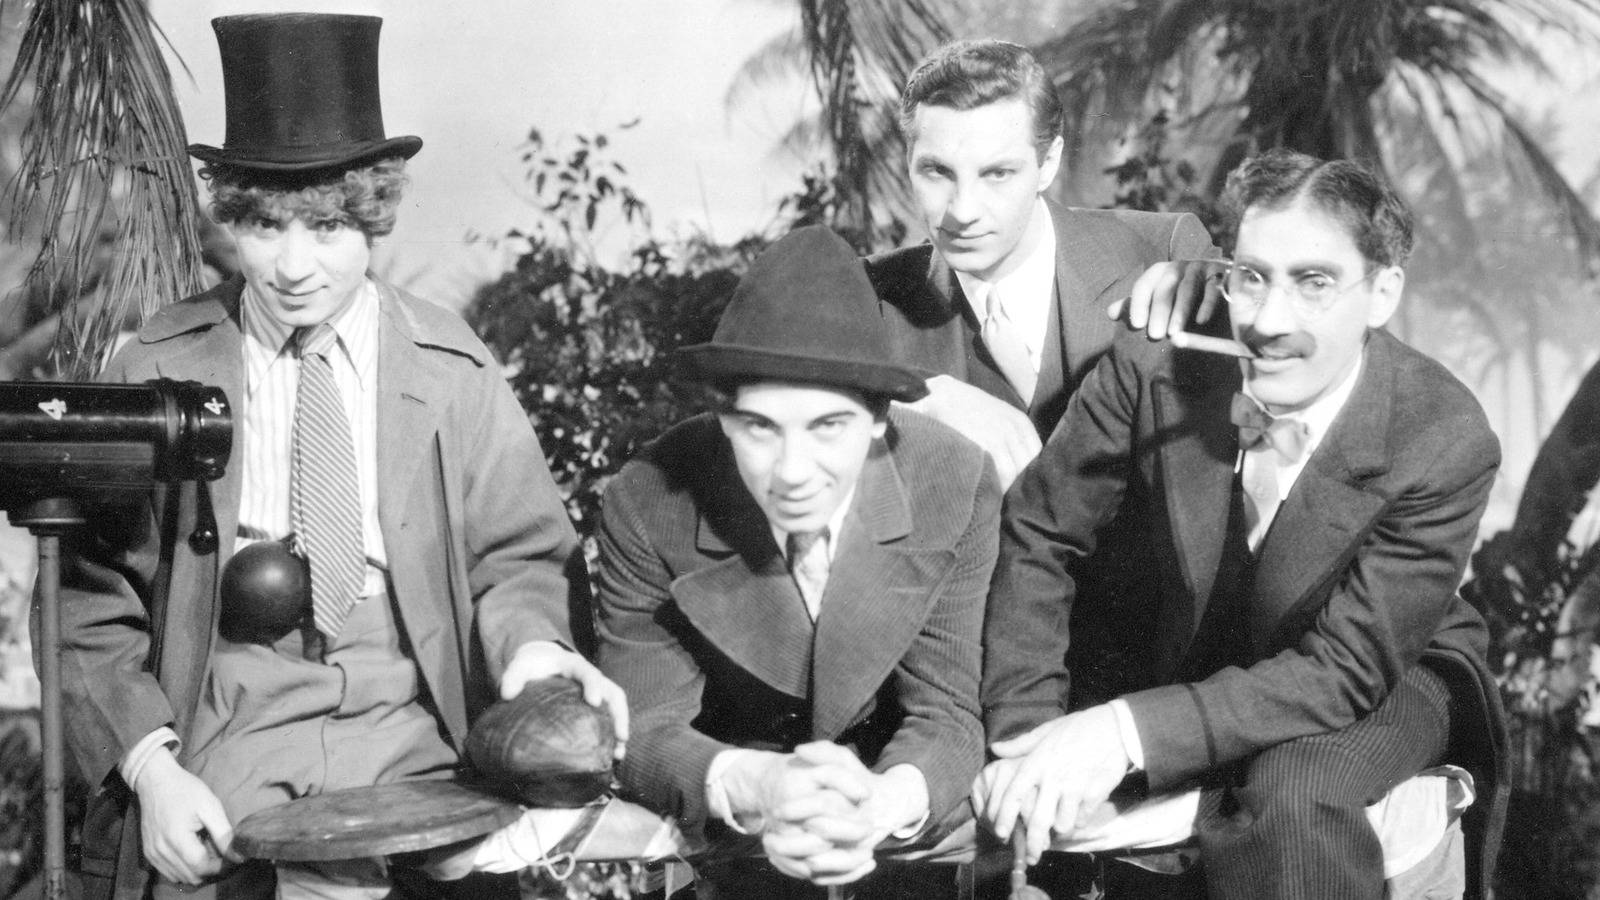 Marx Brothers Posing Together Background